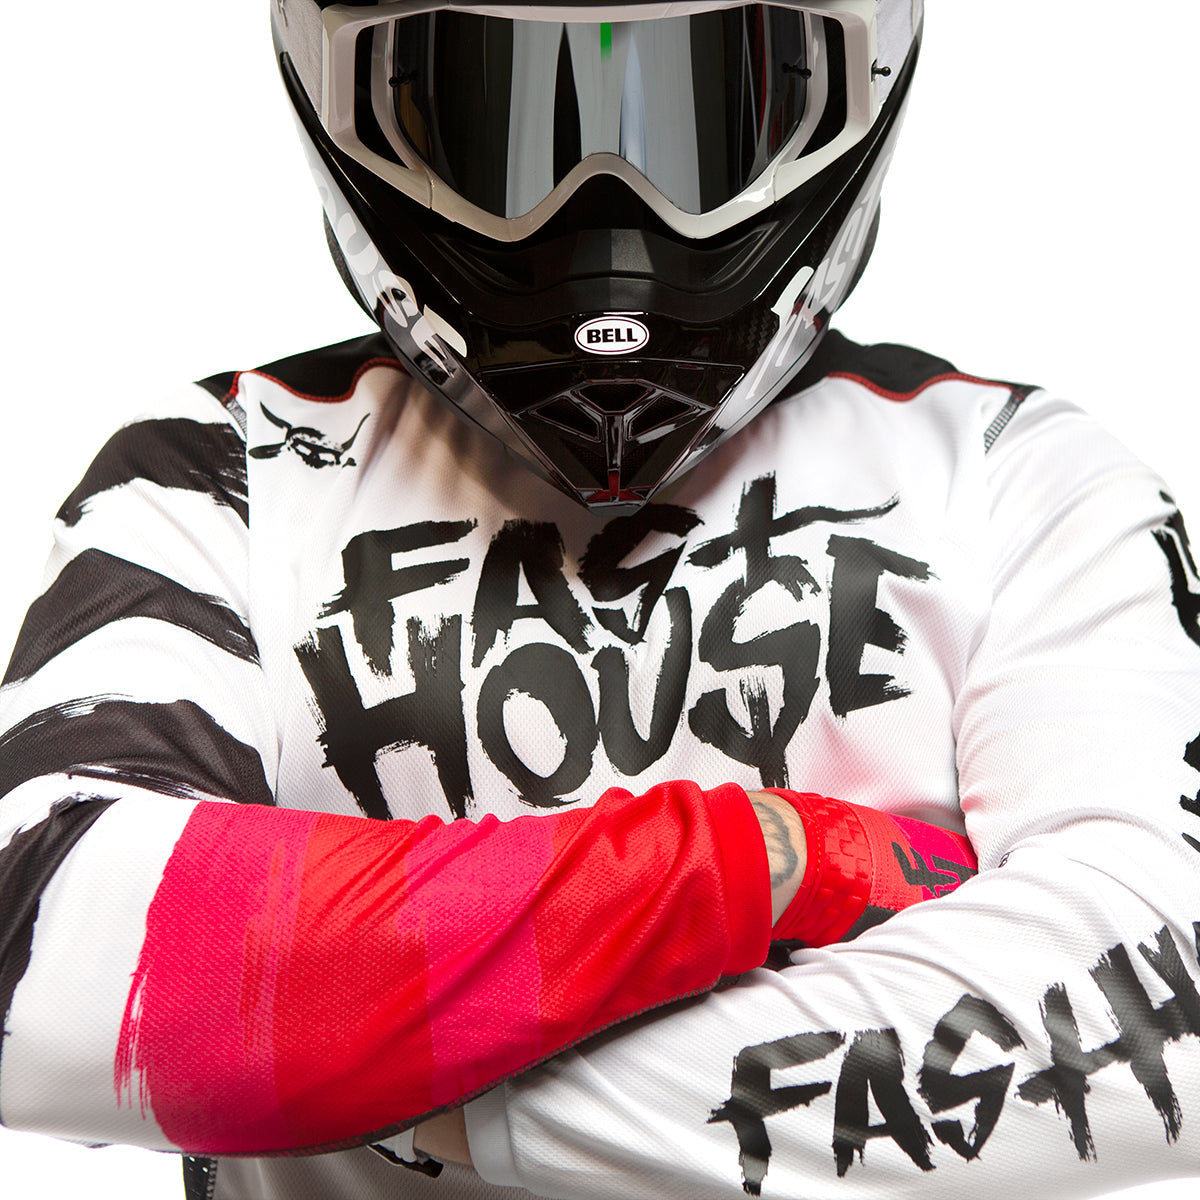 Fasthouse Jester Jersey White SM